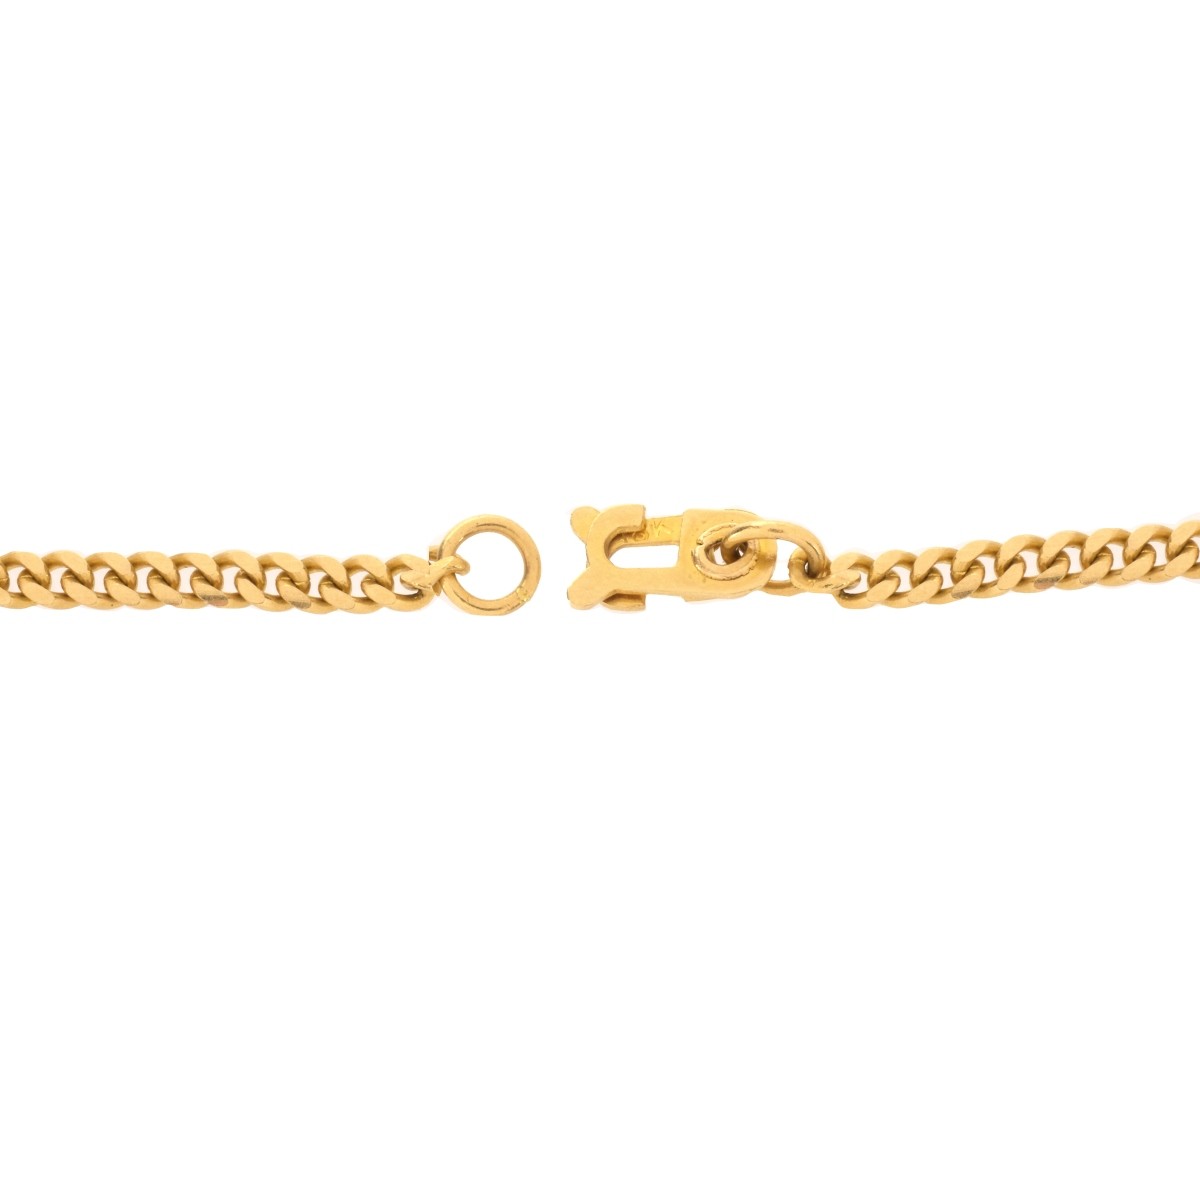 18K Chain Necklace